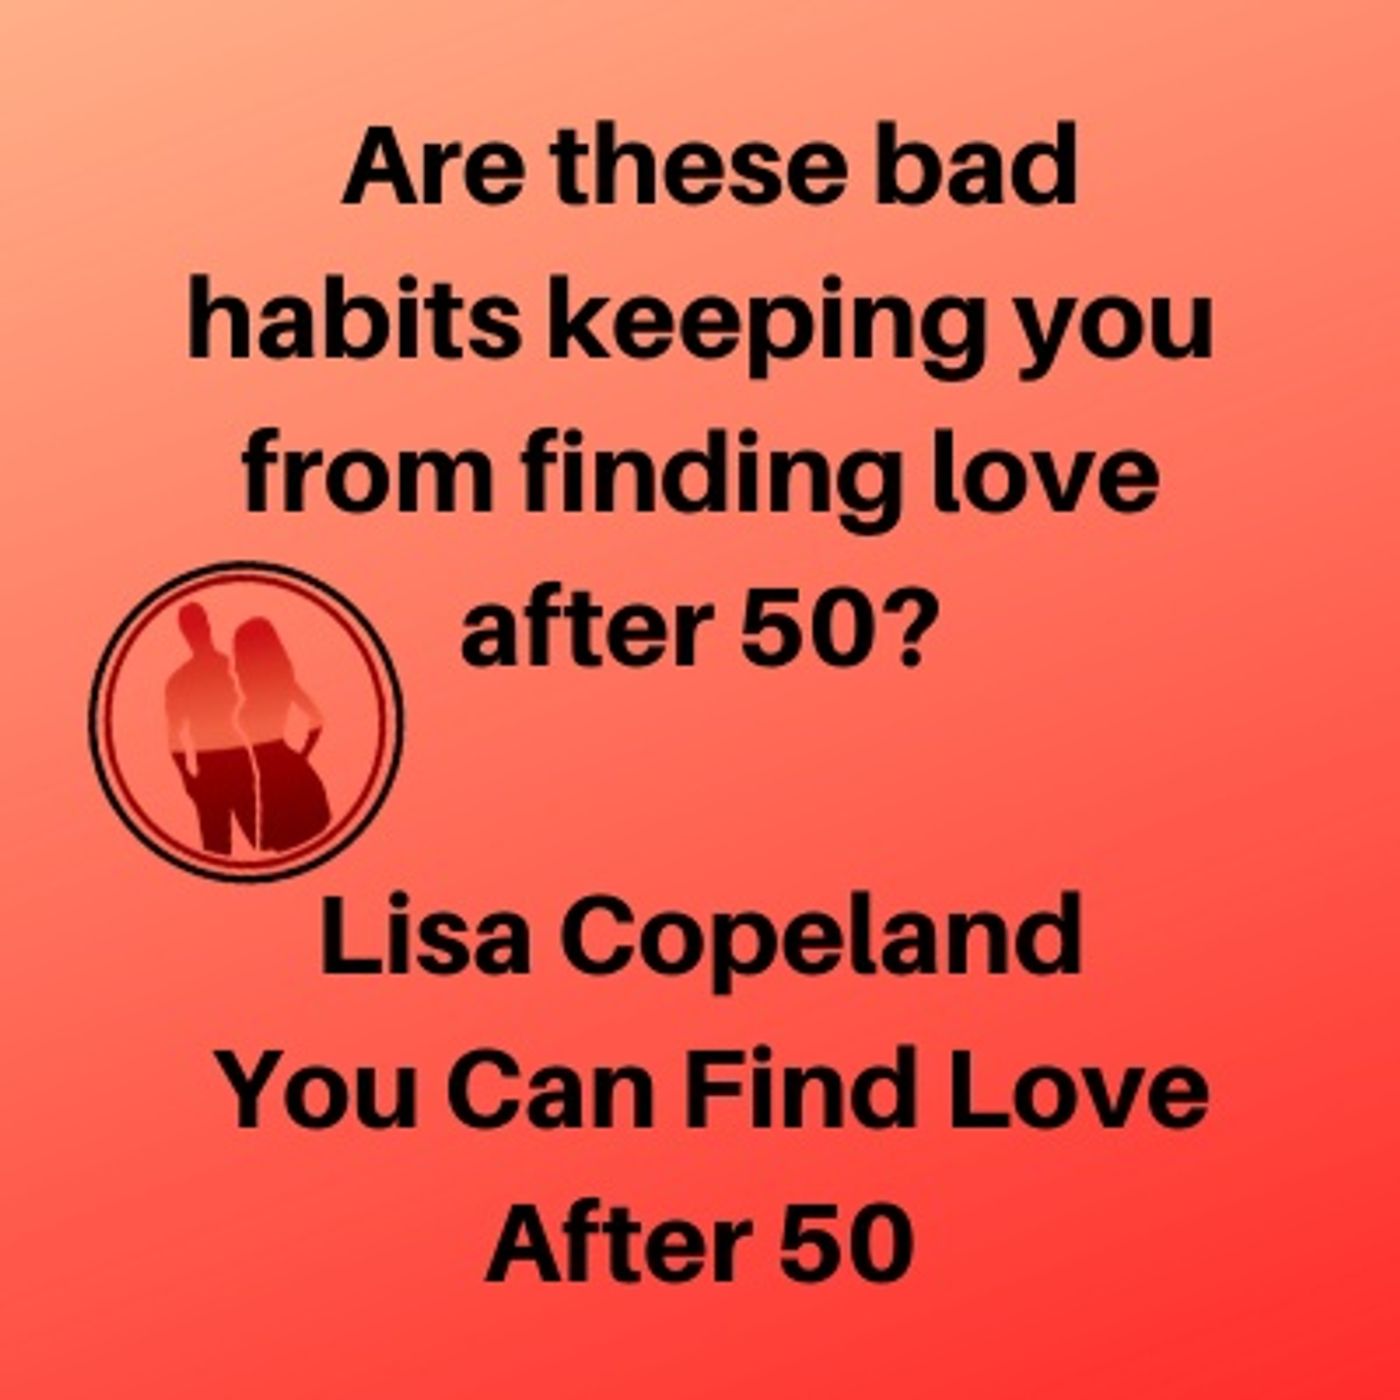 Are these bad habits keeping you from finding love after 50?